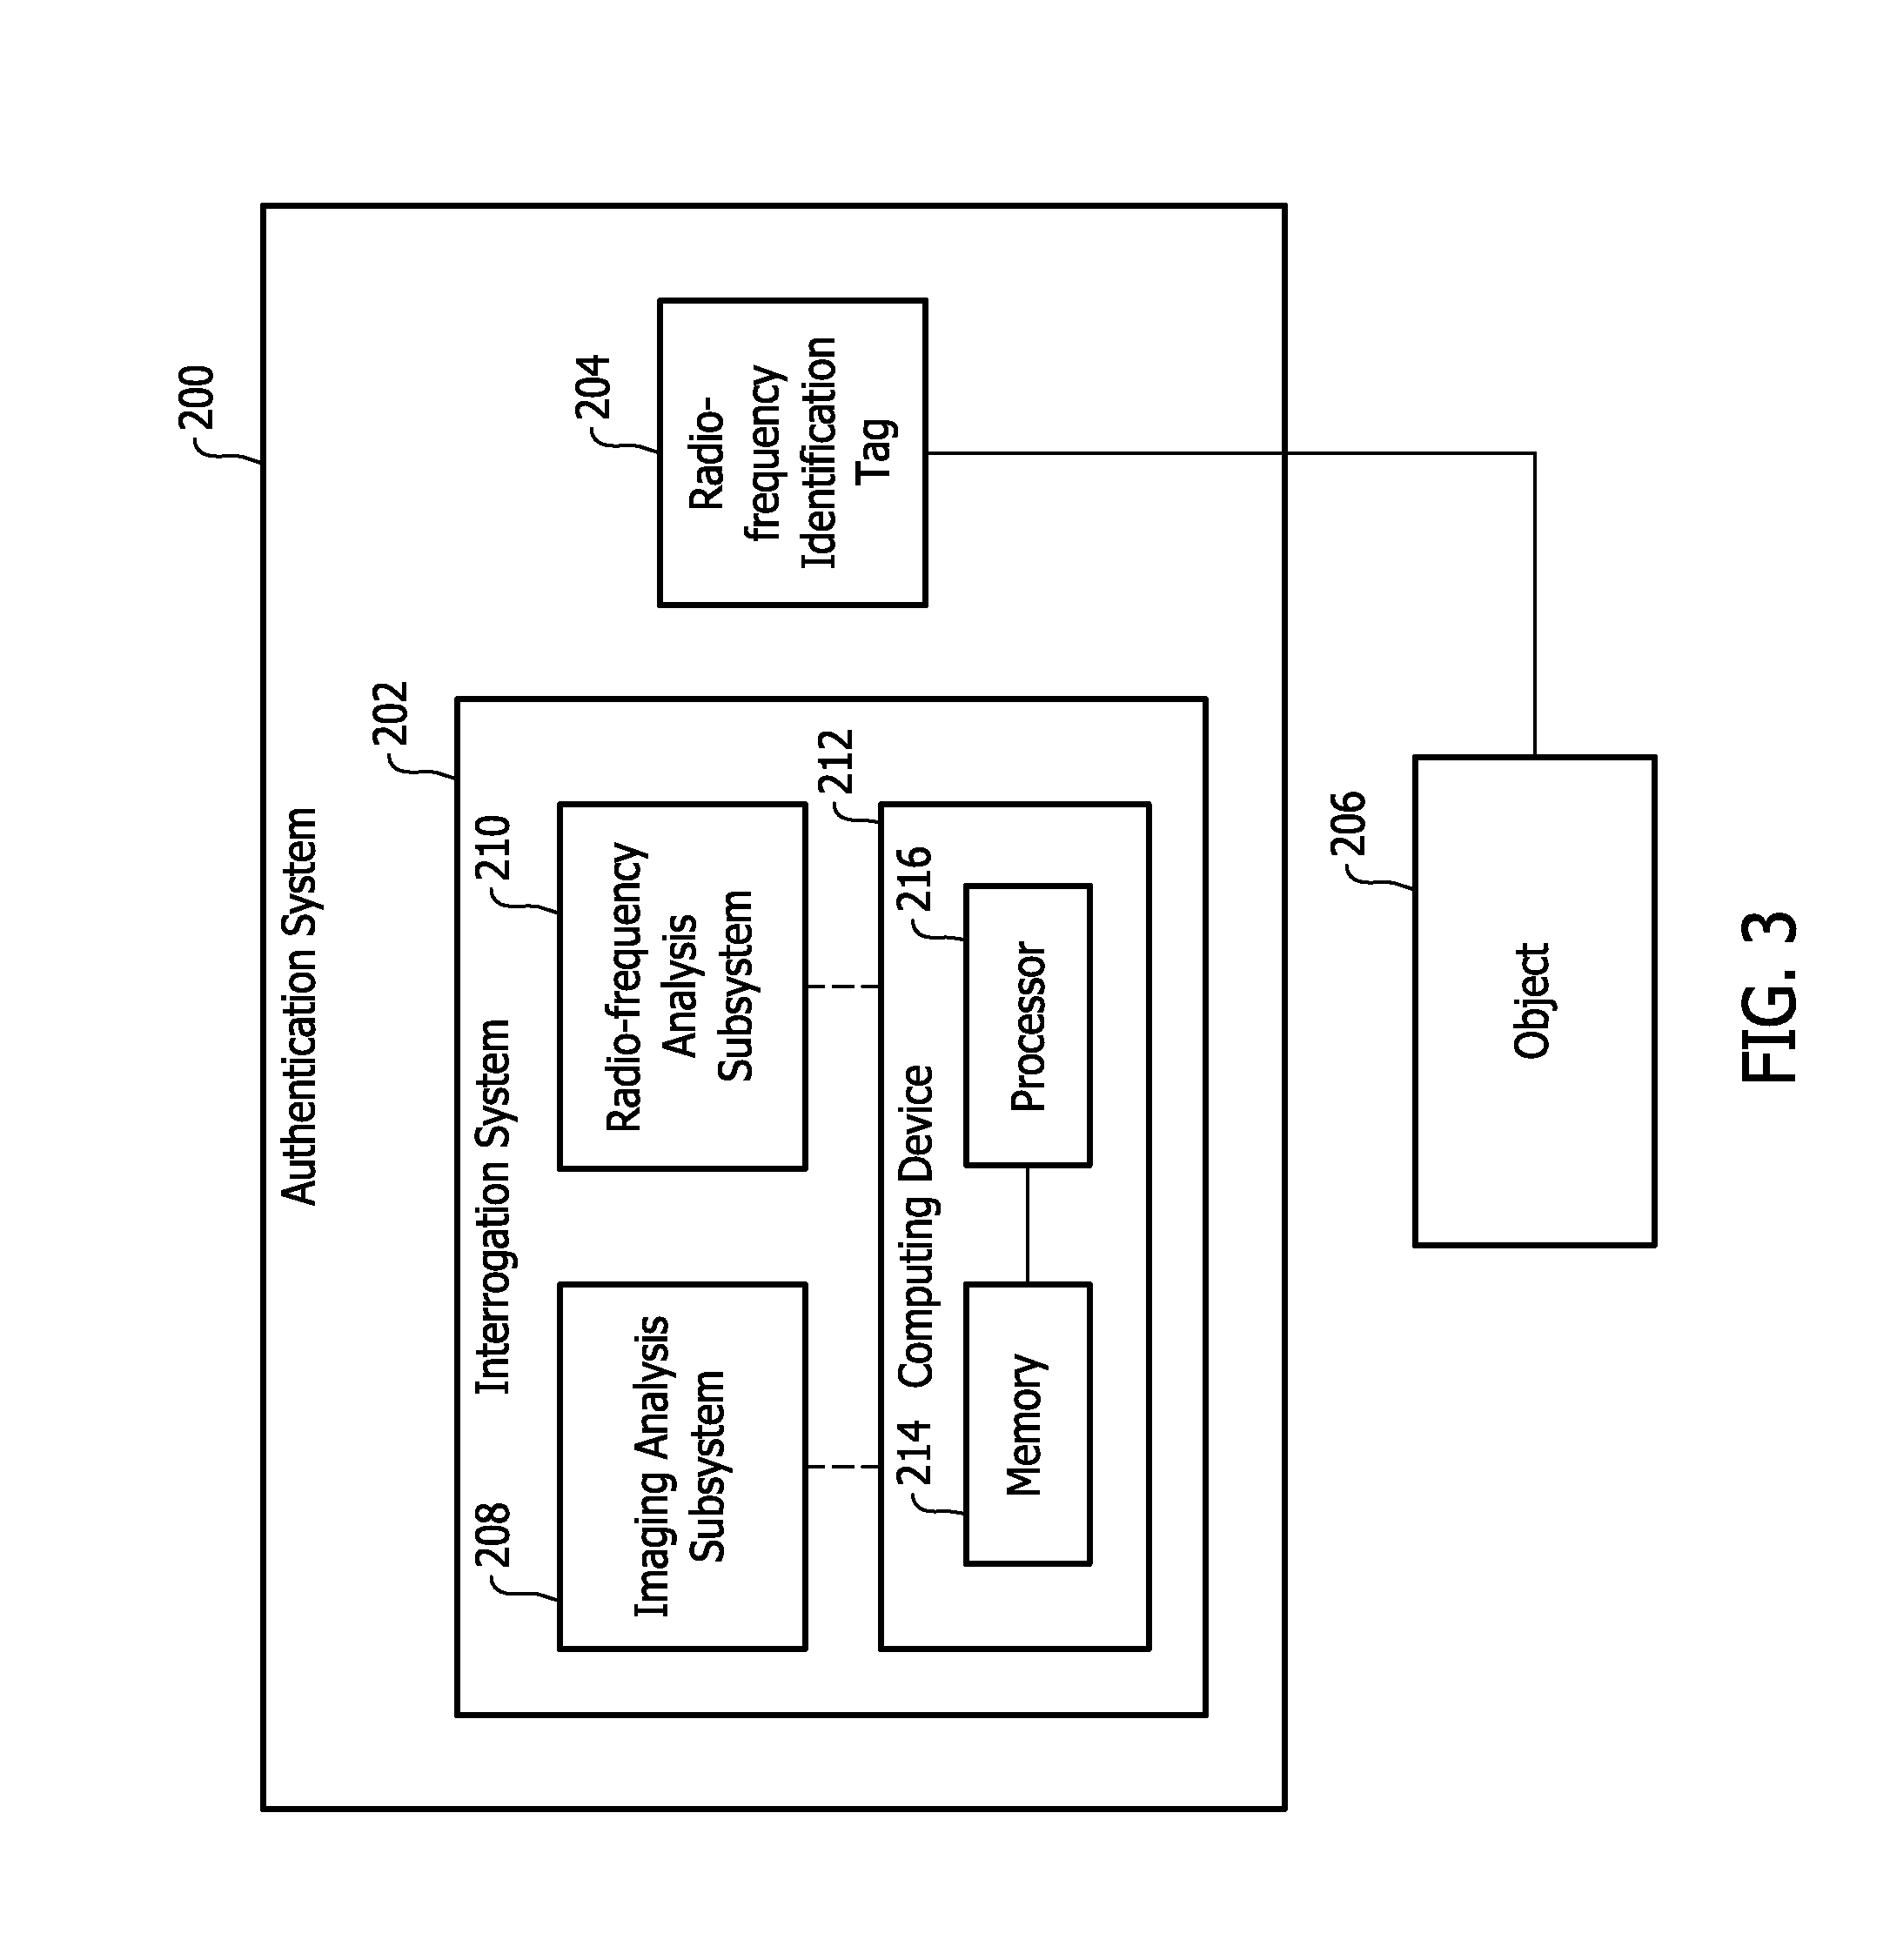 Systems and methods for use in authenticating an object